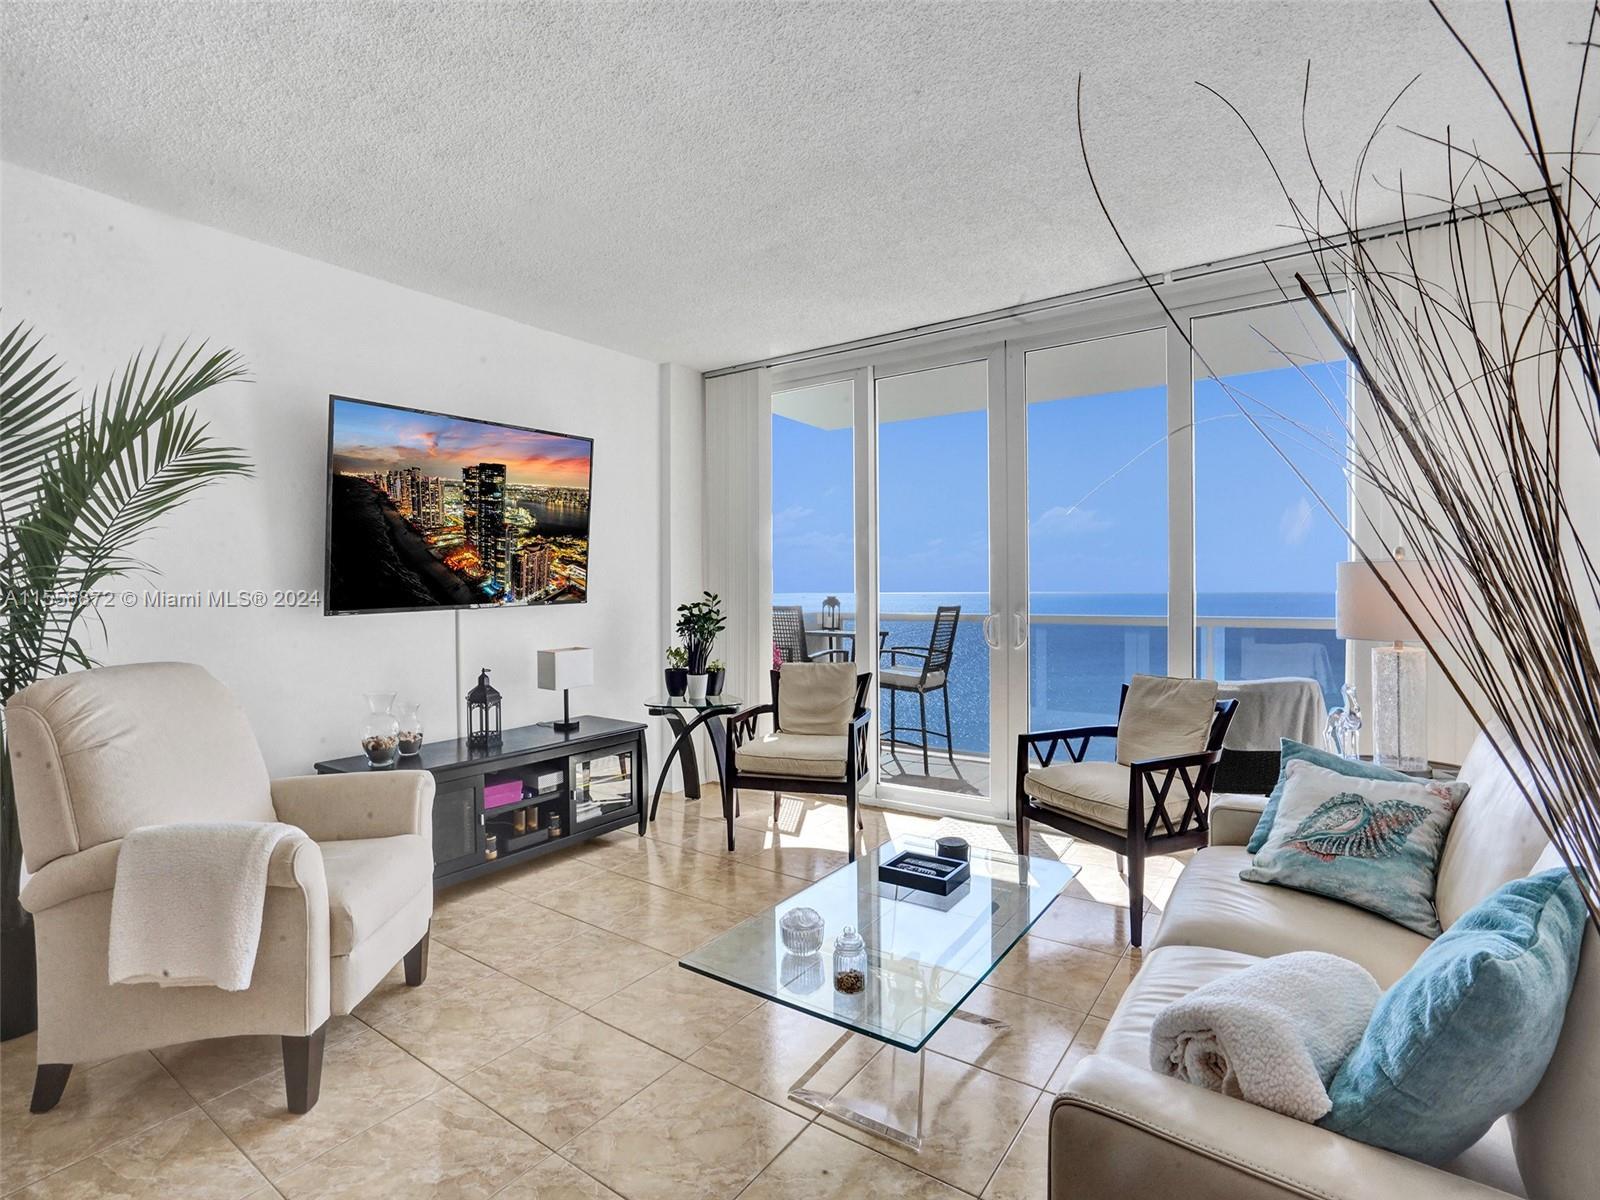 Photo of 3725 S Ocean Dr #1212 in Hollywood, FL